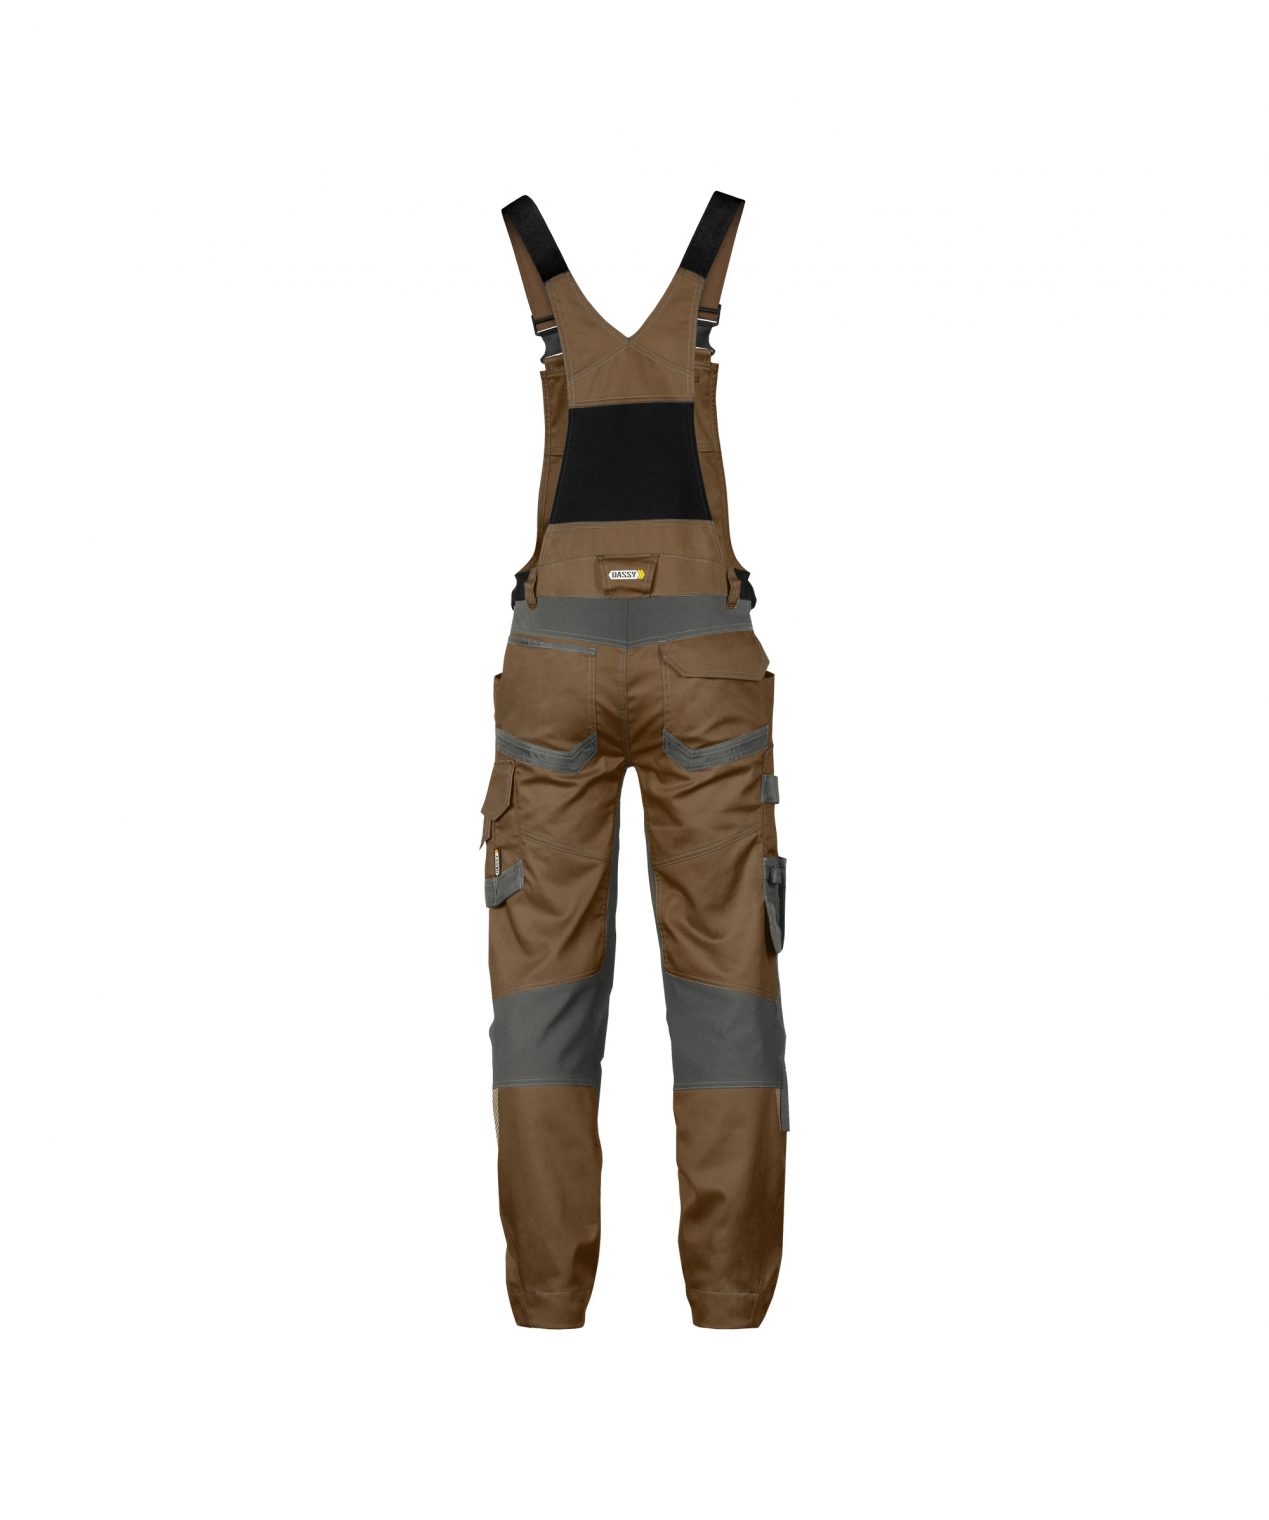 tronix brace overall with stretch and knee pockets clay brown anthracite grey back